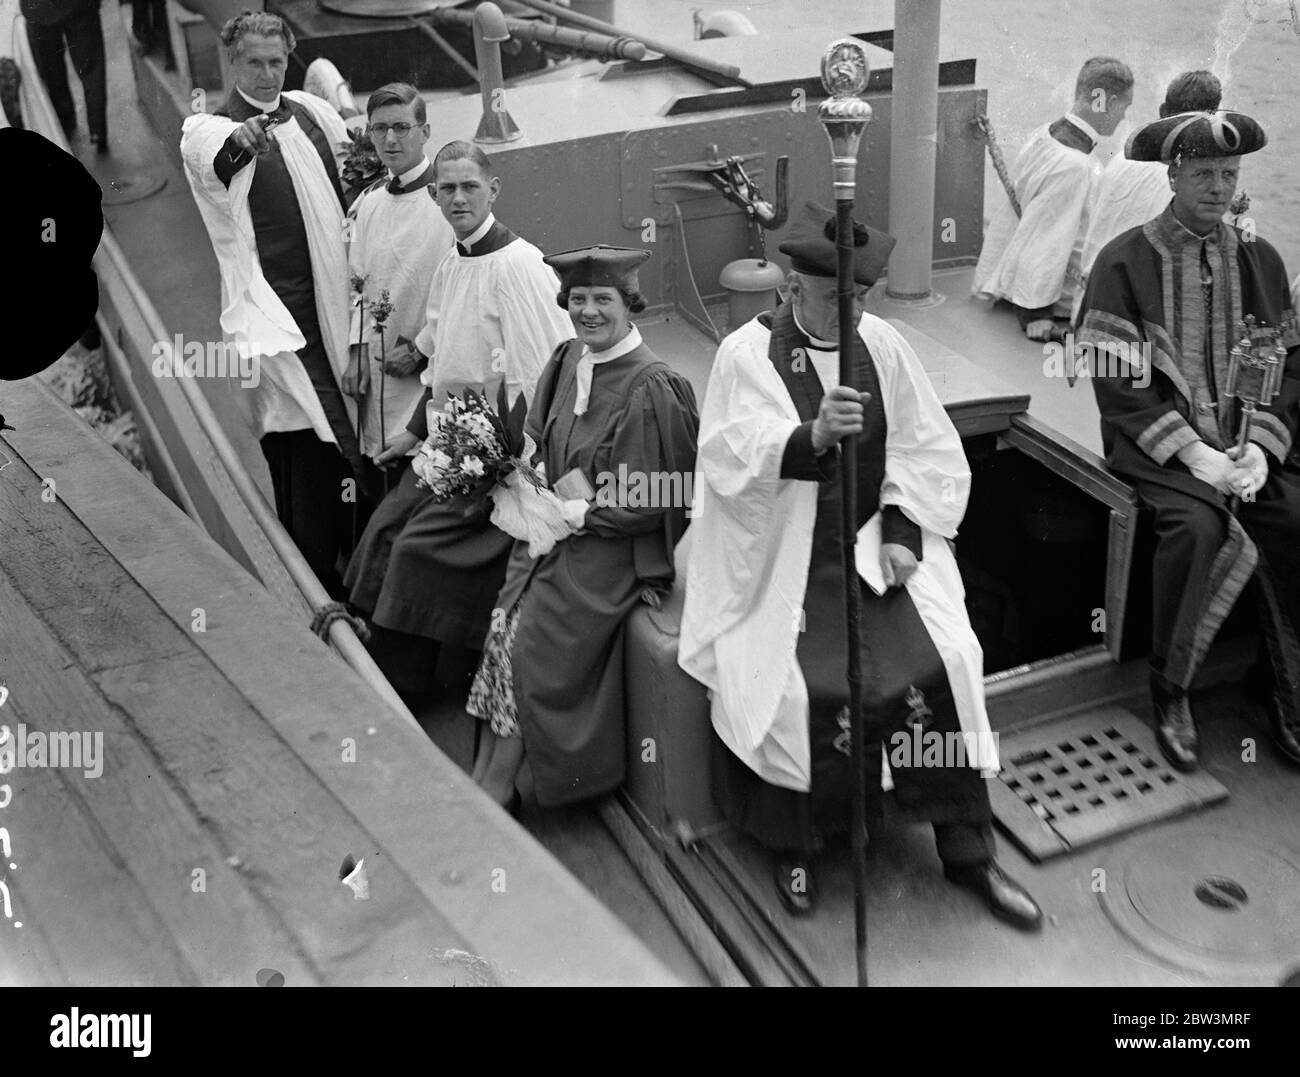 Beating bounds of St Dunstan ' s in East Church was carried out . A tug was used to take the party into the middle of the Thames at Tower Pier when the ceremony of Beating the Bounds of St Dunstan ' s in the East Church was carried out . Photo shows the ceremony aboard the tug . 25 May 1936 Stock Photo